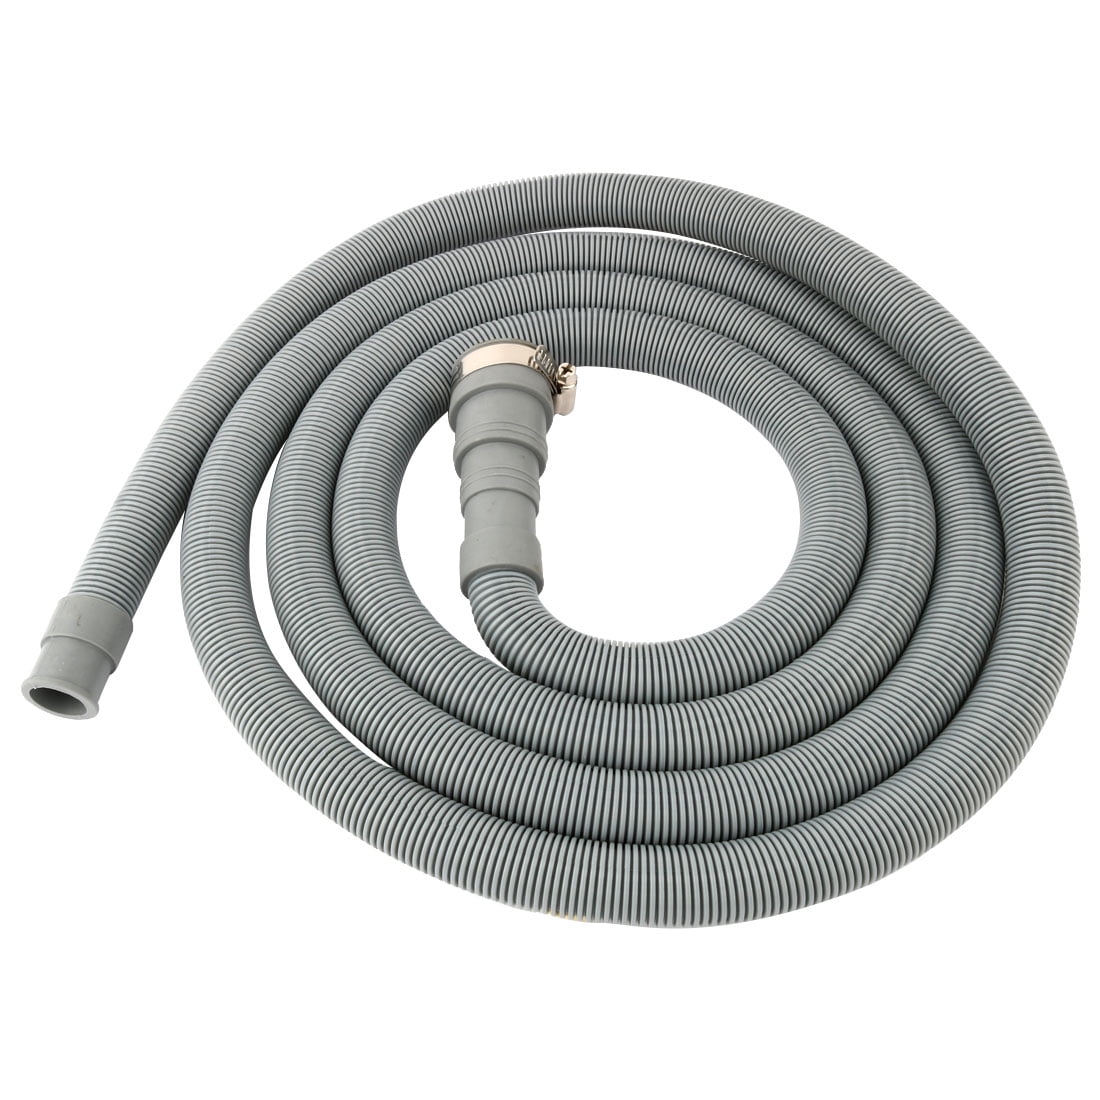 285664 Washing Machine Drain Hose and Clamp for Whirlpool Kenmore New 